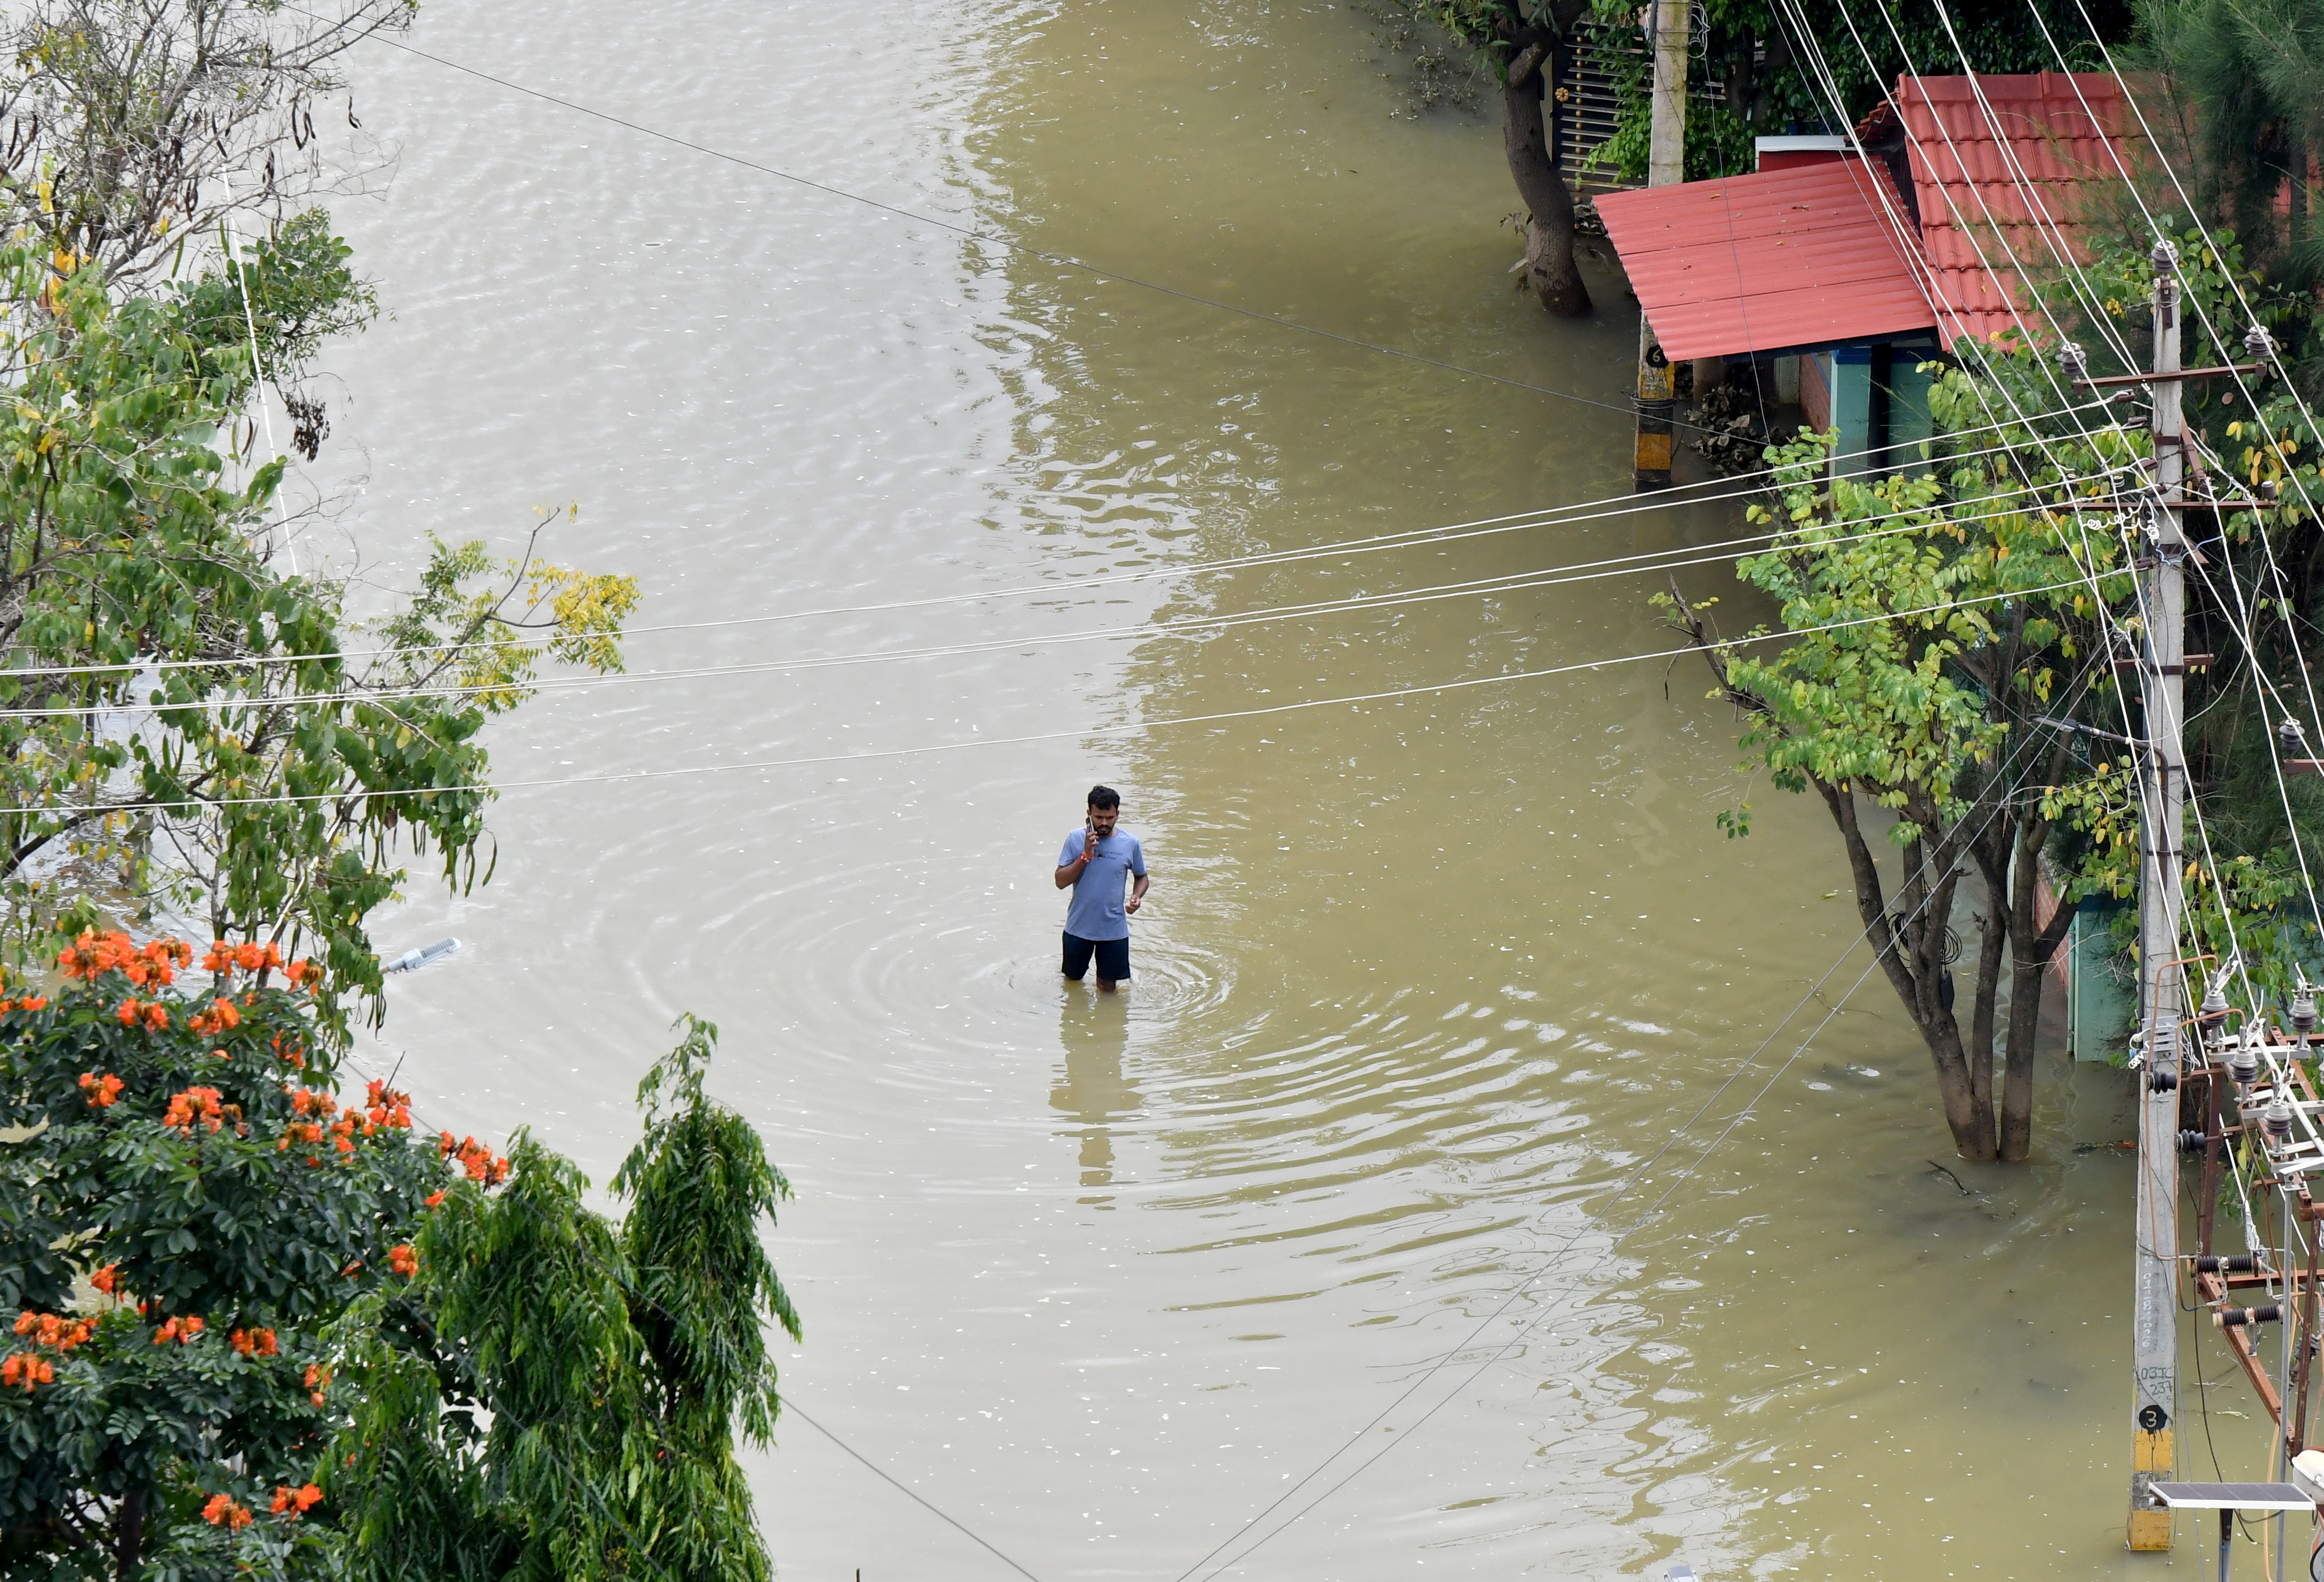 A man speaks on his mobile phone as he wades through a water-logged road in a residential area following torrential rains in Bengaluru